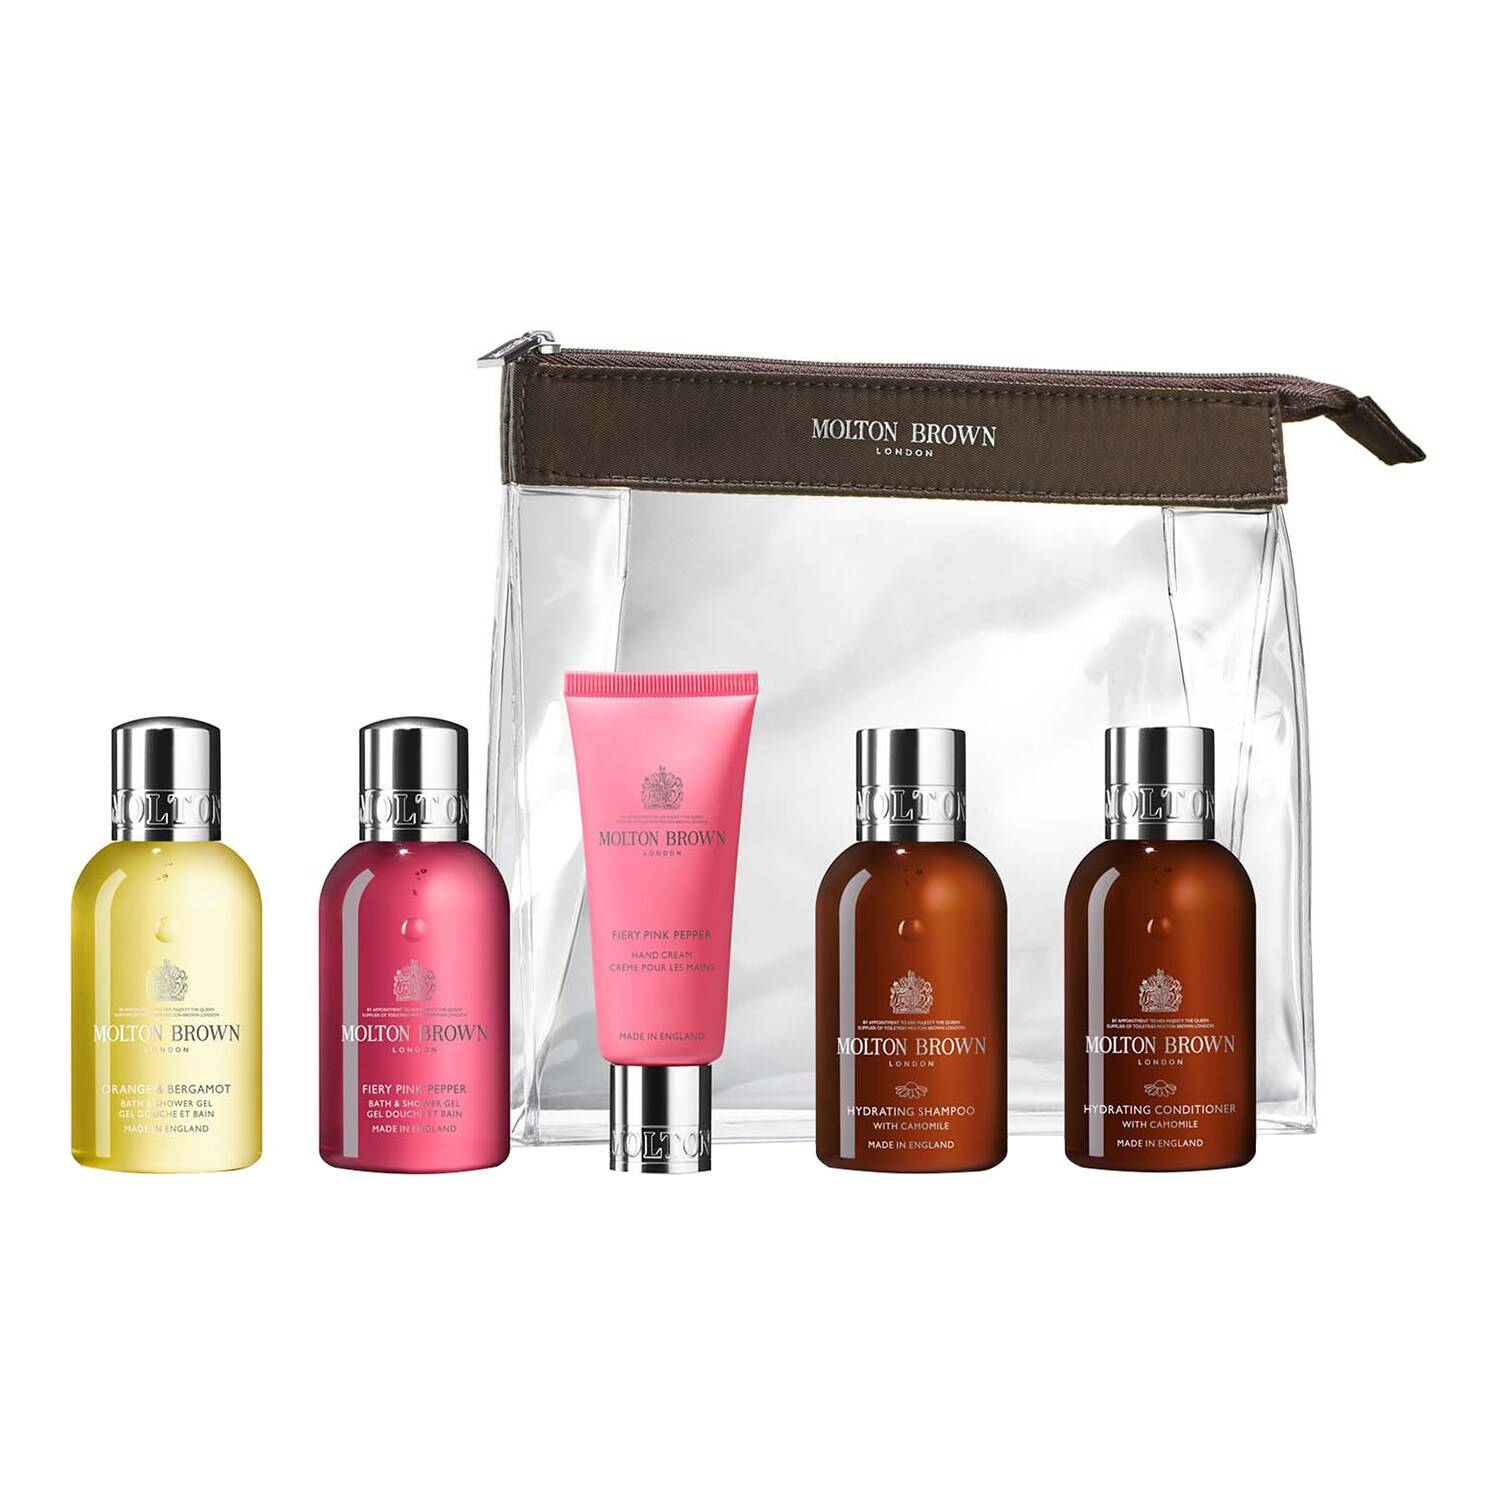 Molton Brown The Revived Voyager Body & Hair Carry-On Bag Set